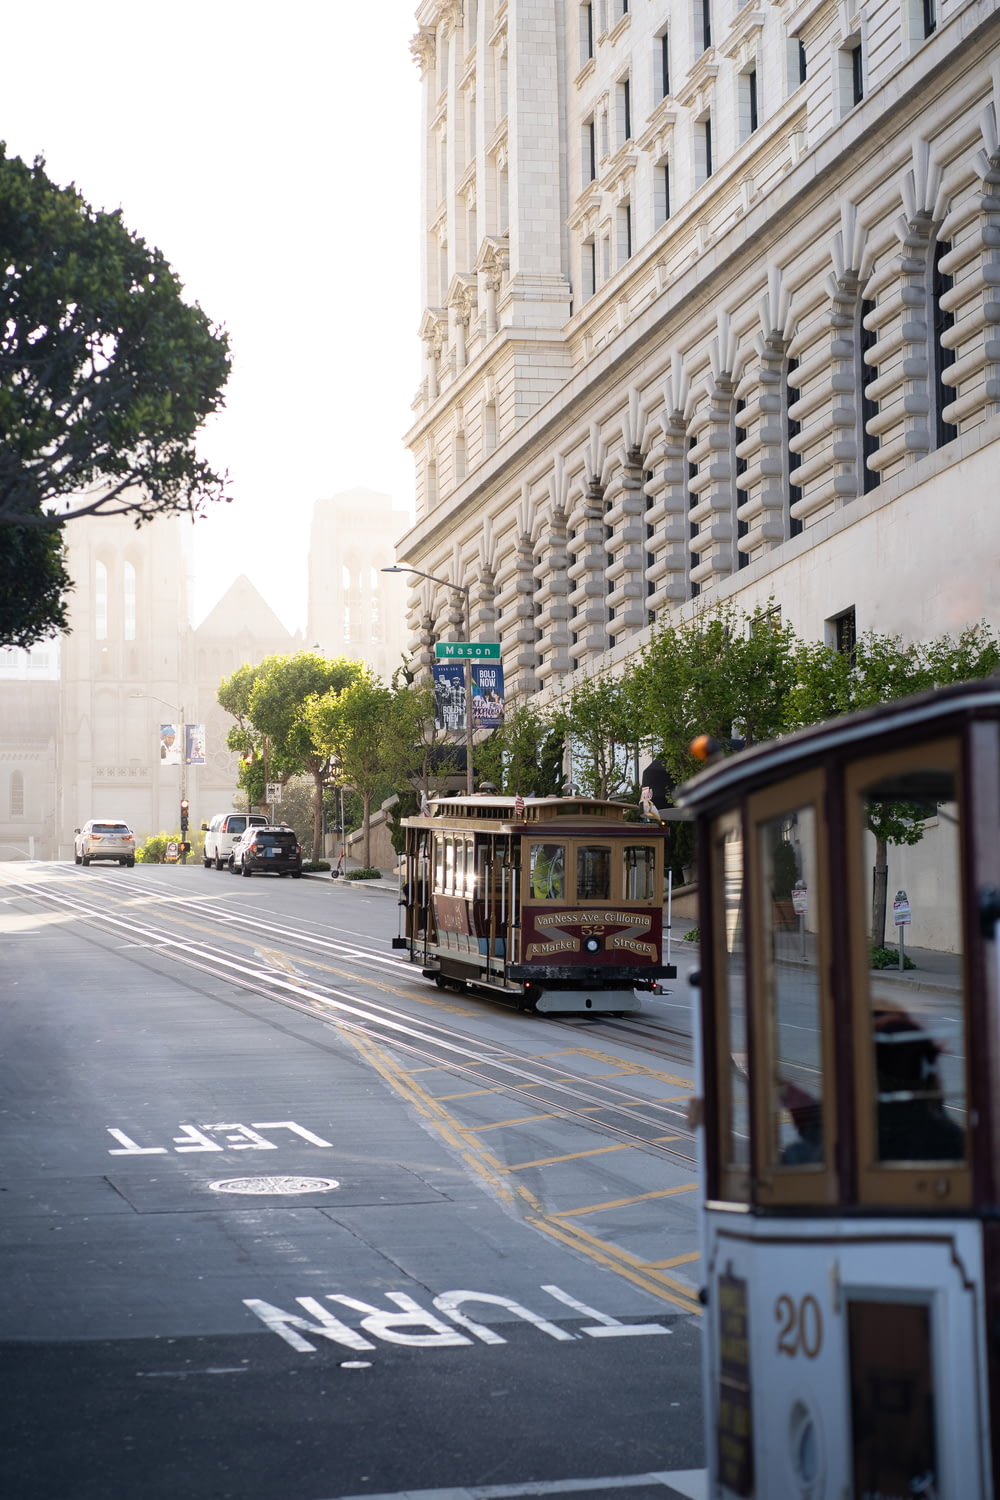 a trolley car driving down a street next to tall buildings